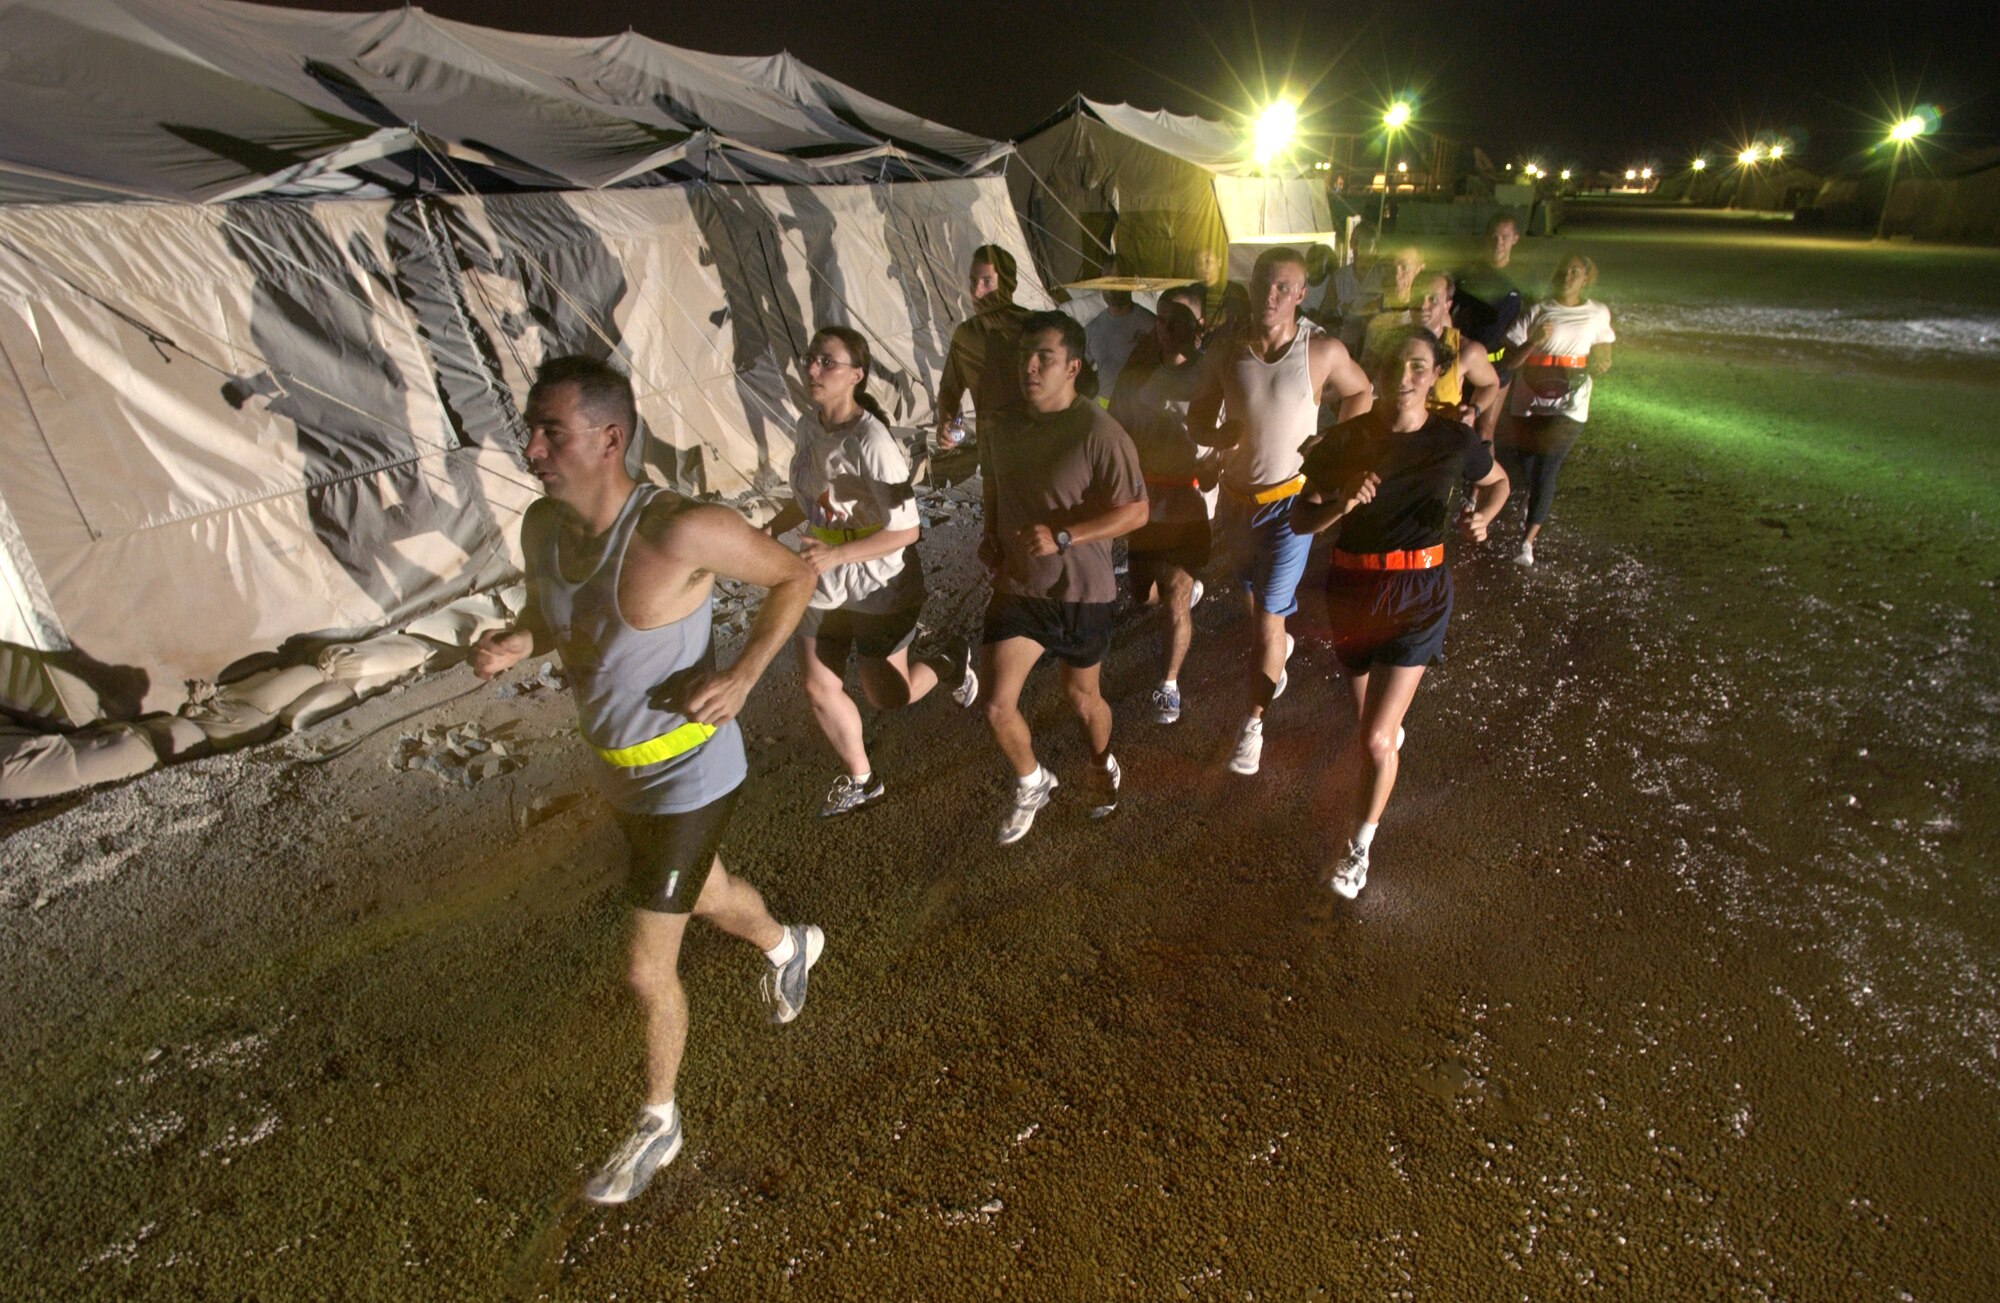 AL UDEID AIR BASE, Qatar -- Airmen from the 379th Air Expeditionary Wing here participate in an evening "fun run" to keep fit and escape the daytime heat.  Airmen worldwide are on a similar track in preparing for the new Air Force fitness test that replaces cycle ergometry with running, push-ups and sit-ups.  (U.S. Air Force photo by Master Sgt. Lance Cheung) 